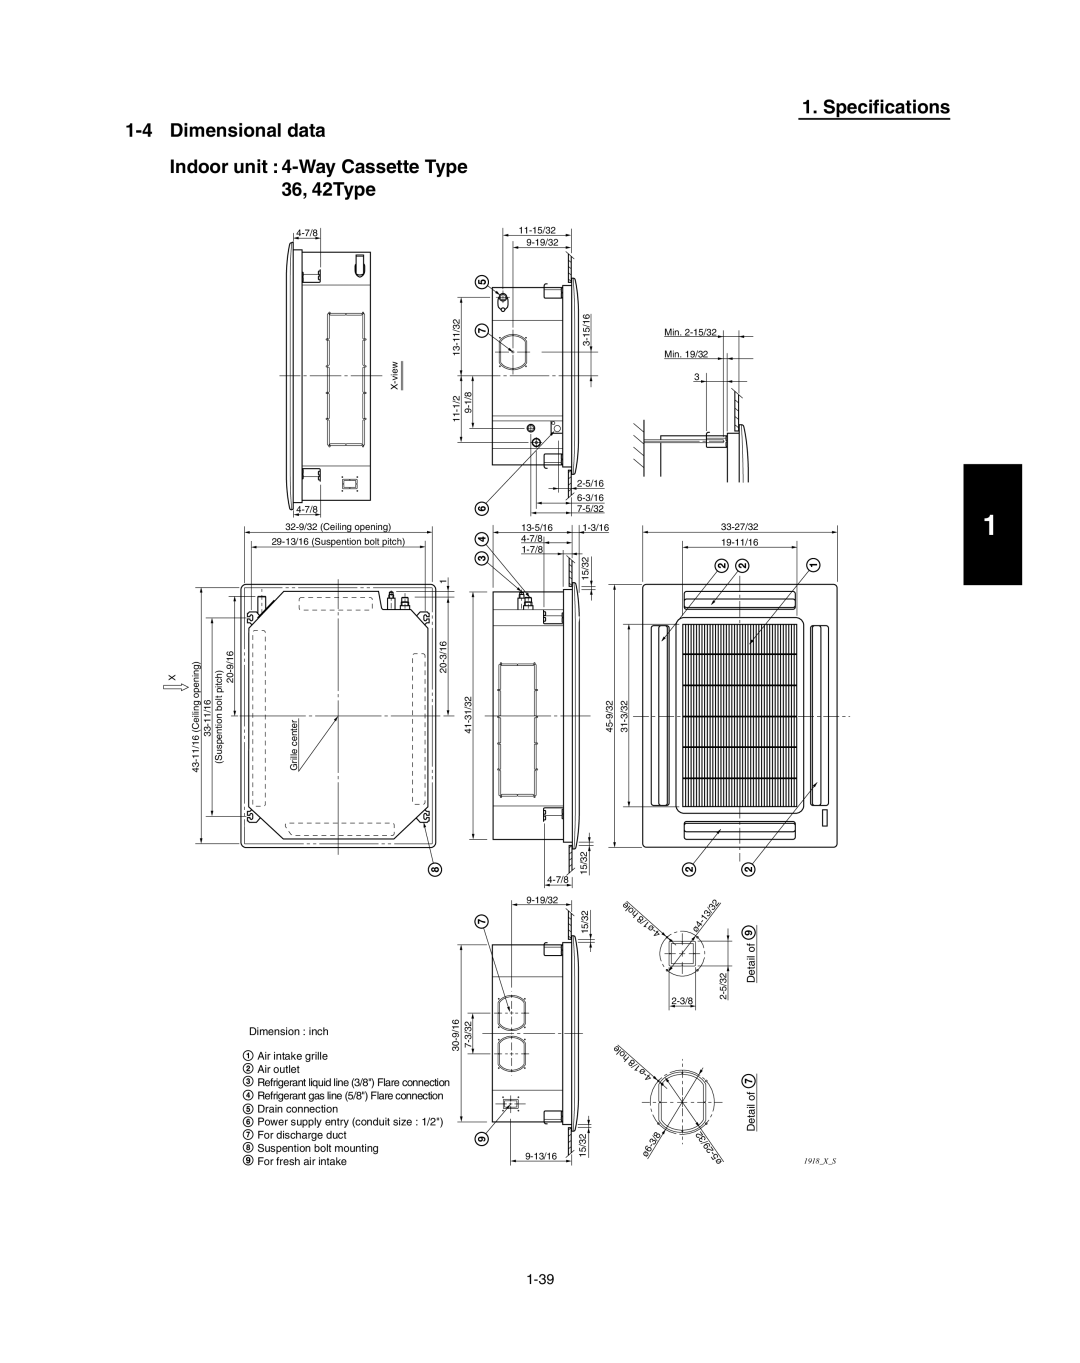 Panasonic R410A service manual 1-4Dimensional data, Indoor unit : 4-WayCassette Type 36, 42Type, Specifications 